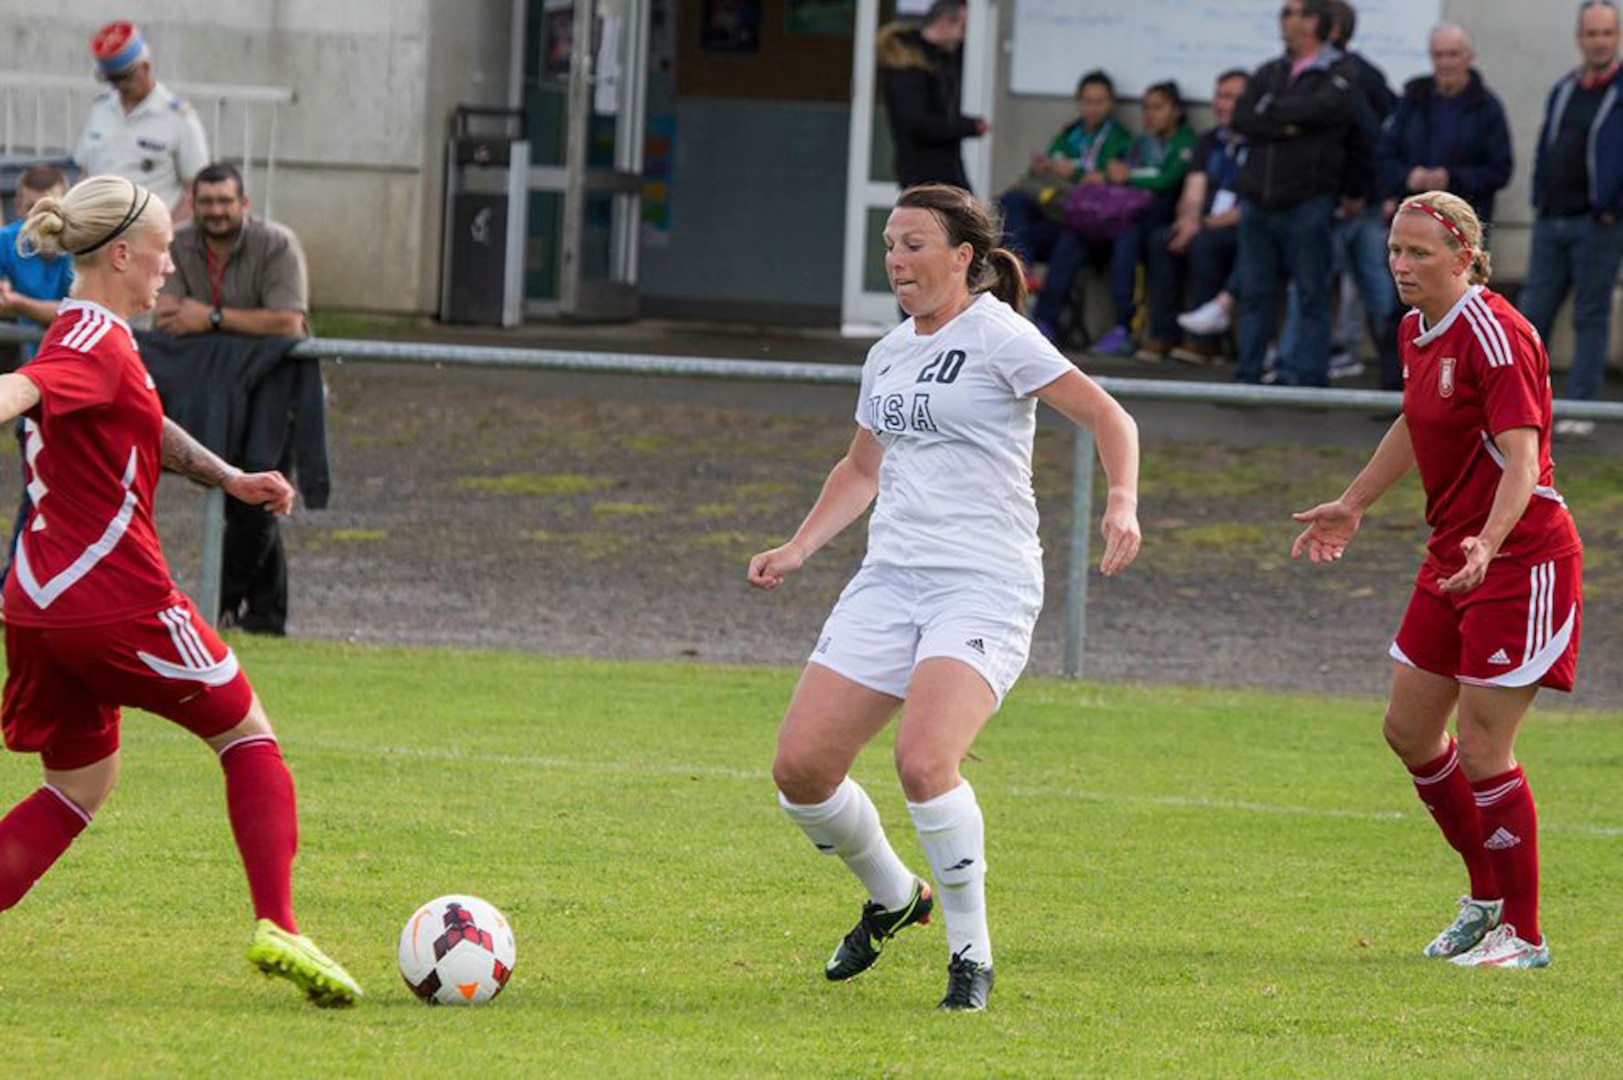 Marine Corps 1st Lt. Brittany Fruin of Camp Lejeune, NC passes the ball against Germany in their opening match of the 2016 Conseil International du Sport Militaire (CISM) World Women's Football Cup in Rennes, France 24 May to 6 June.  